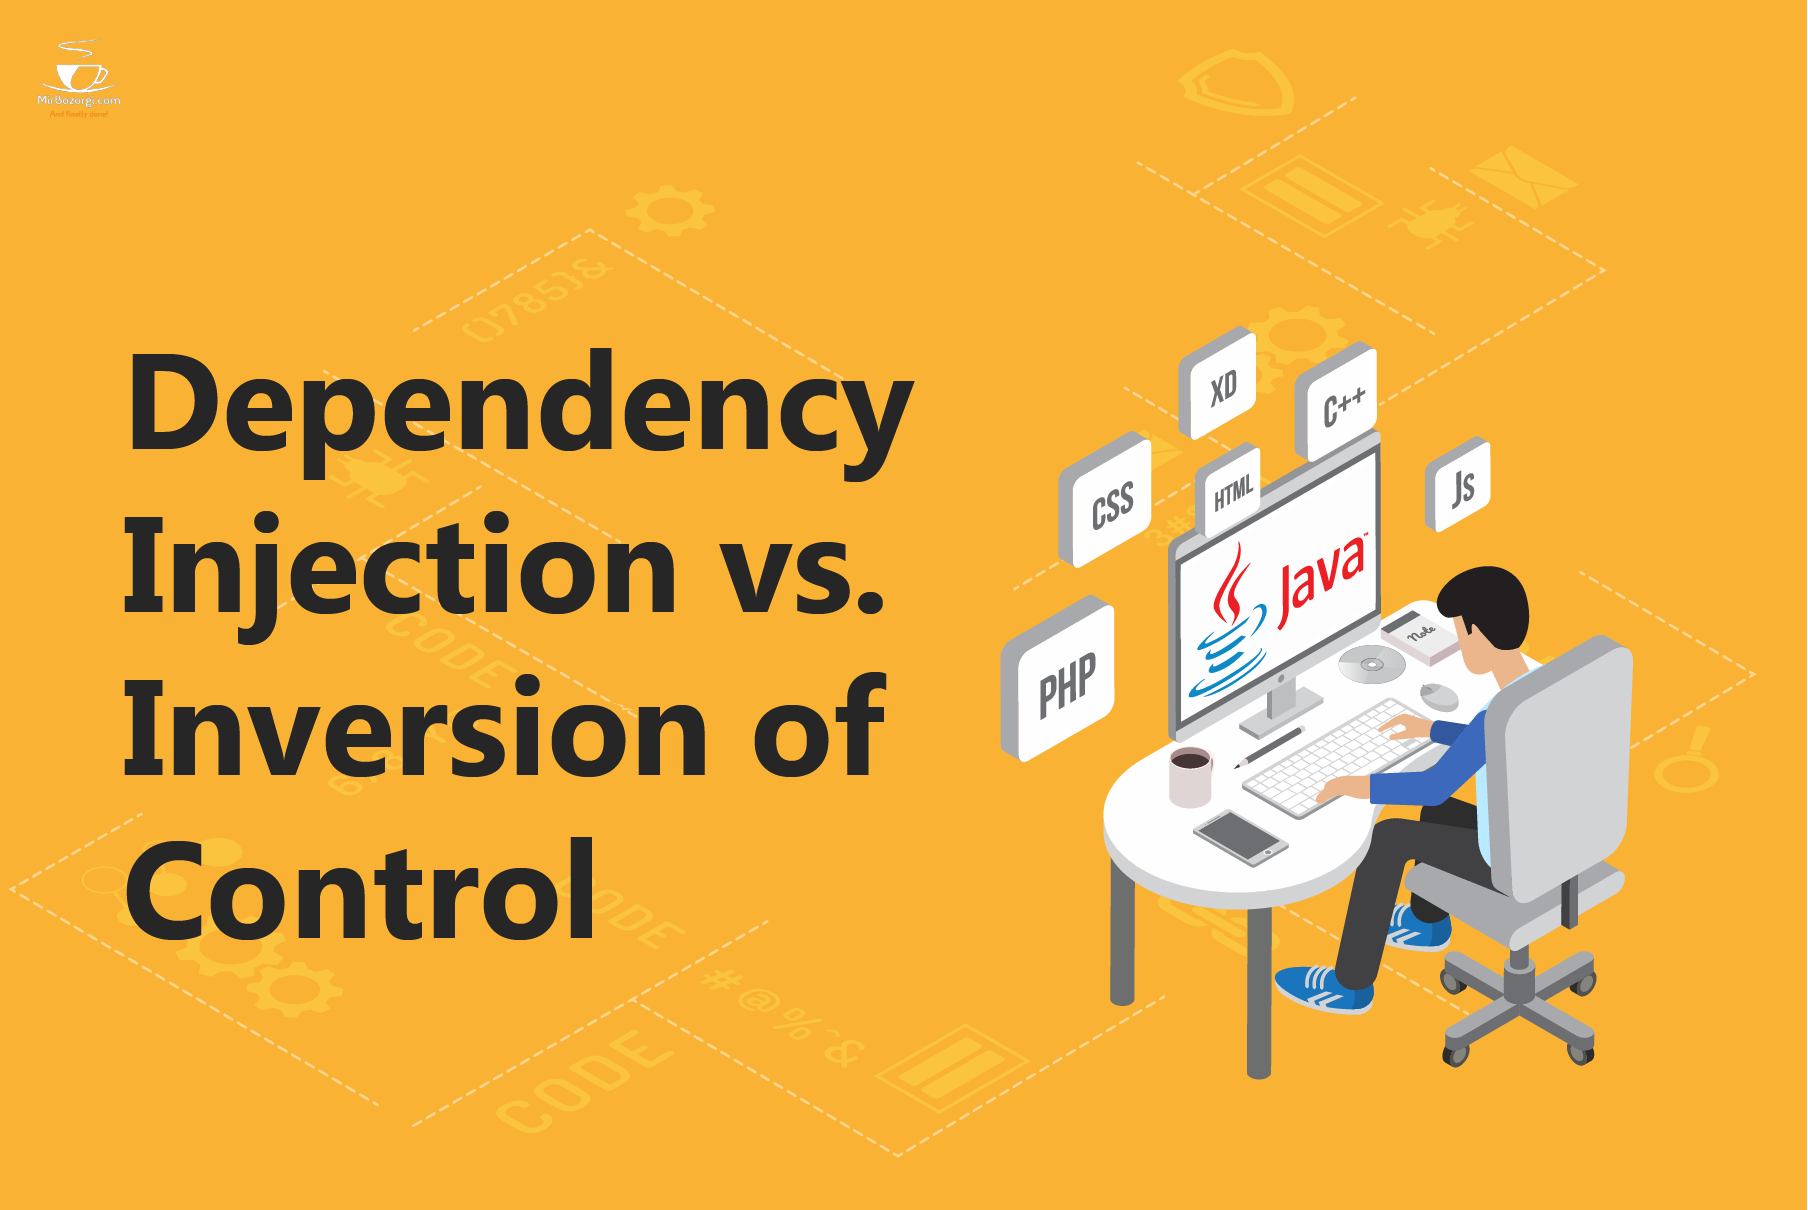 Dependency Injection vs. Inversion of Control